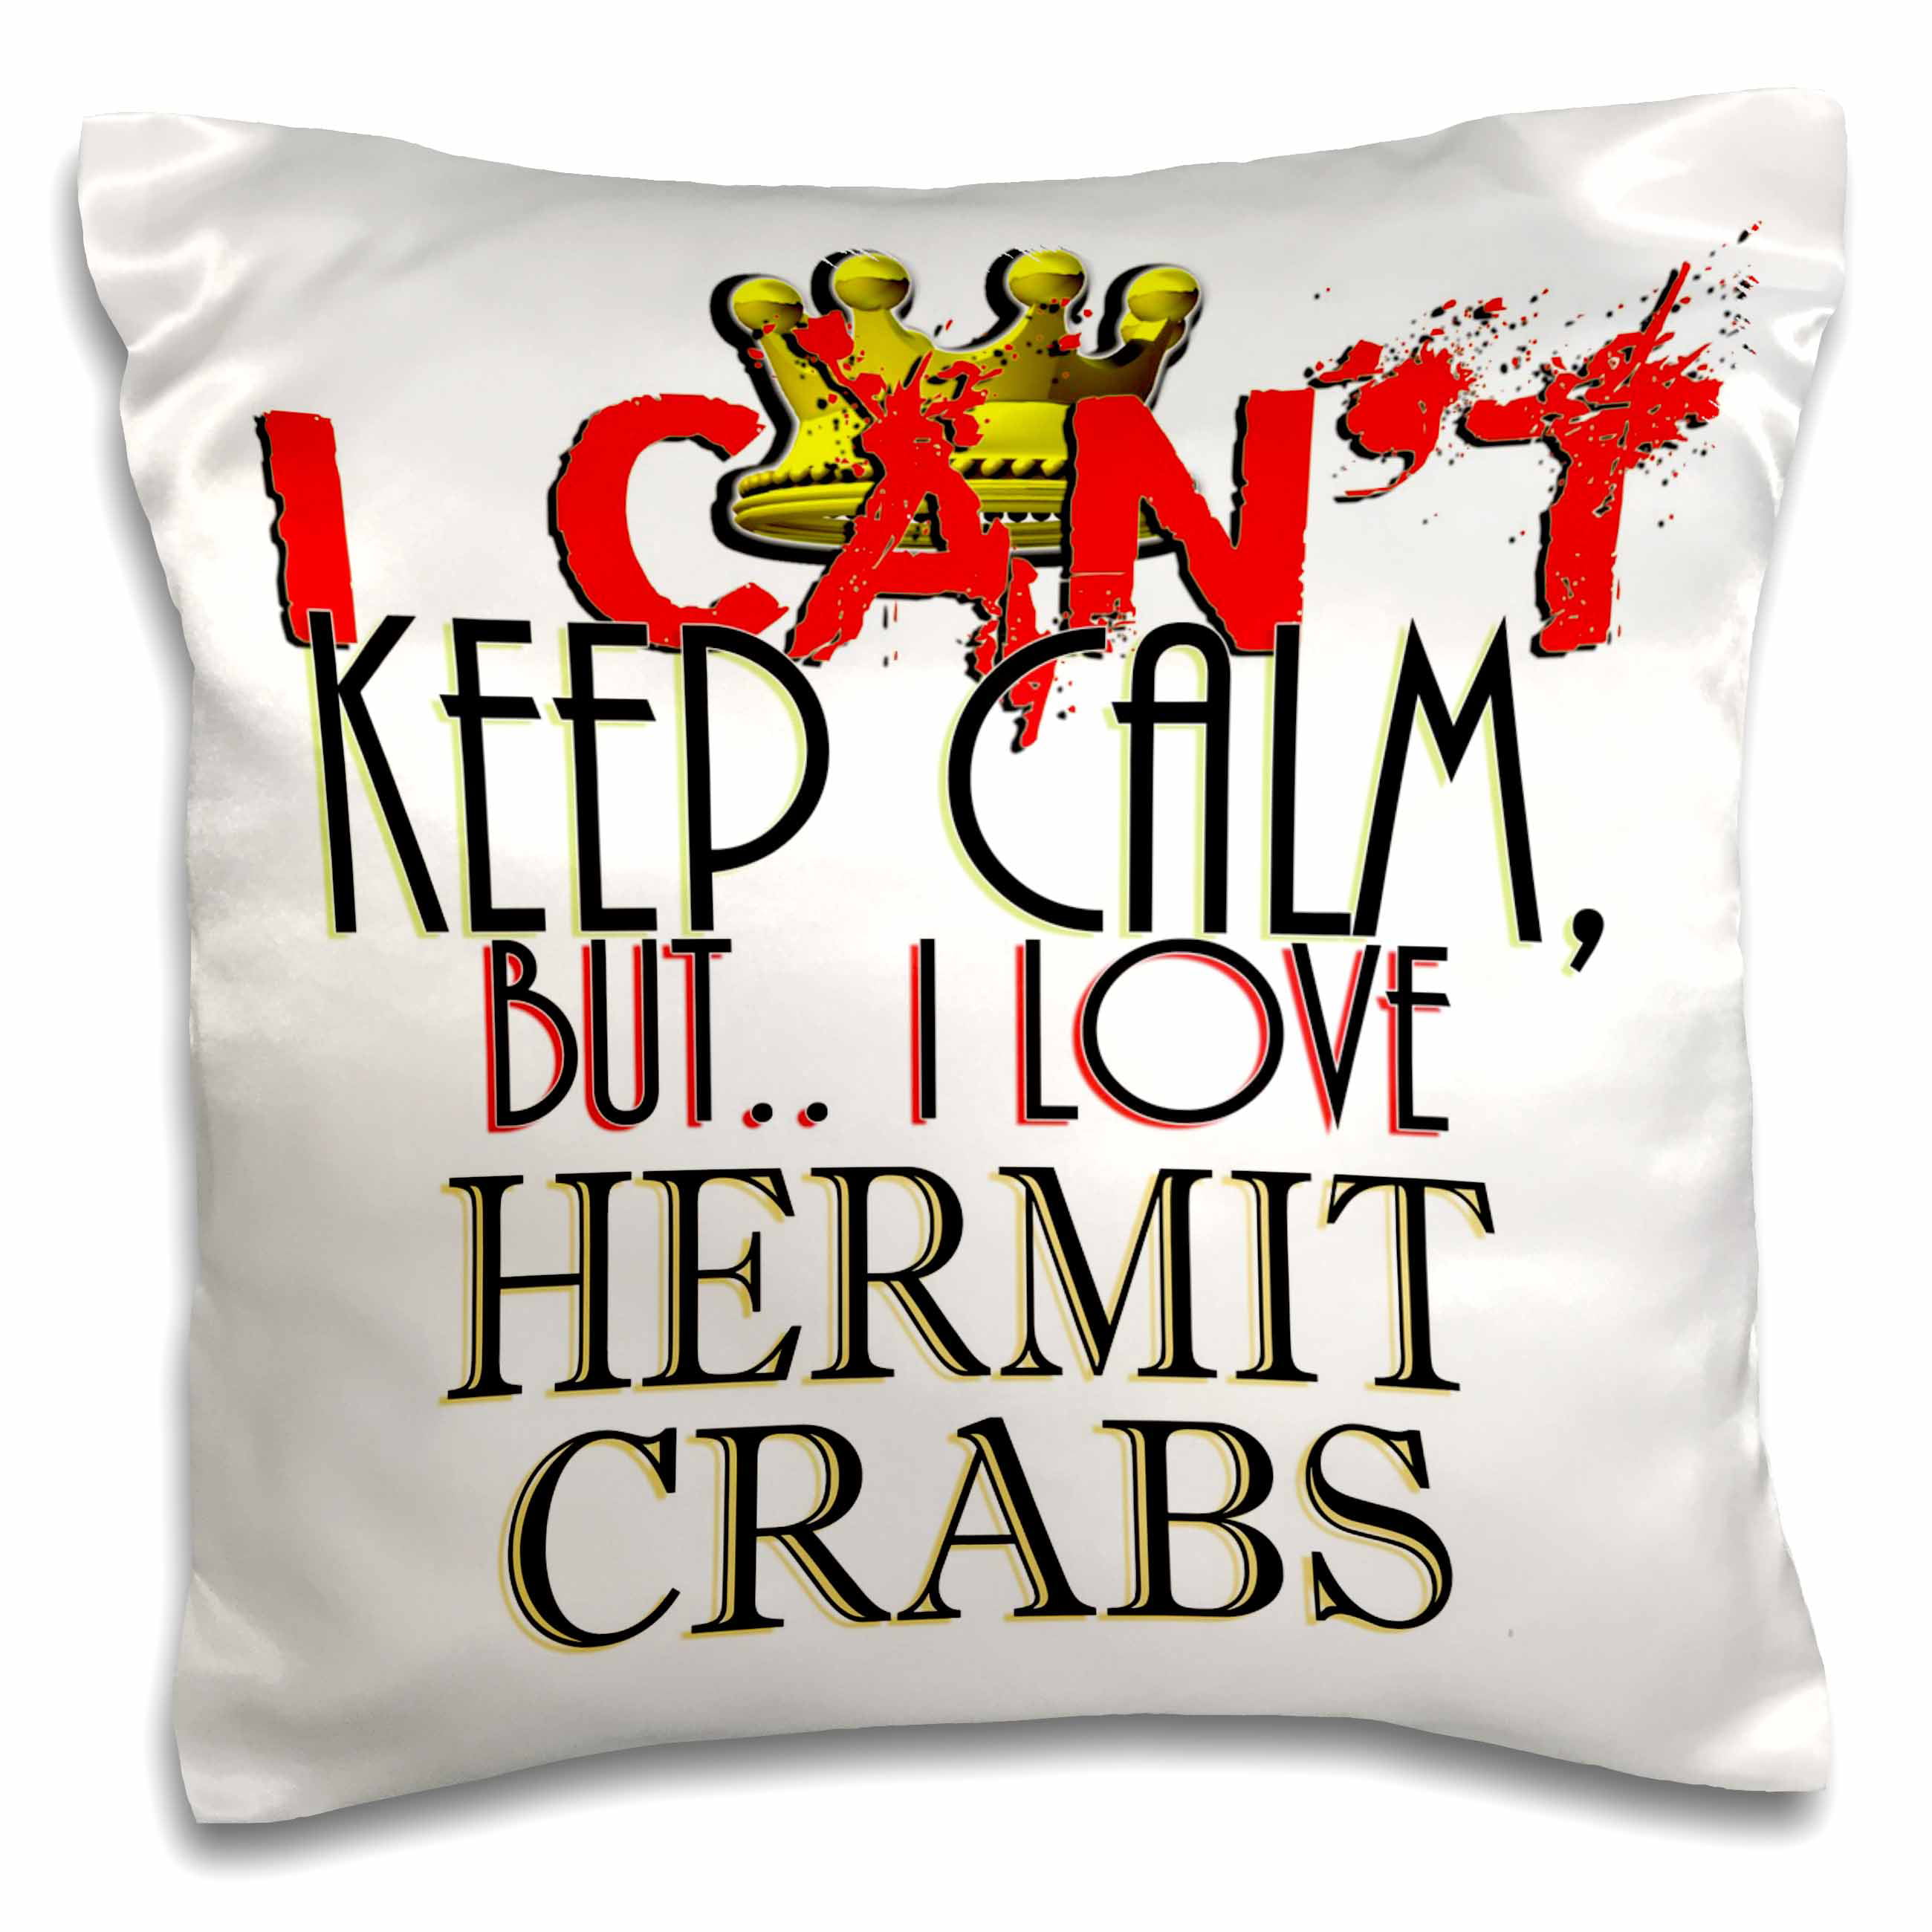 3dRose Crazy Hermit Crab Lady Pillow Case pc_175104_1 16 by 16-inch